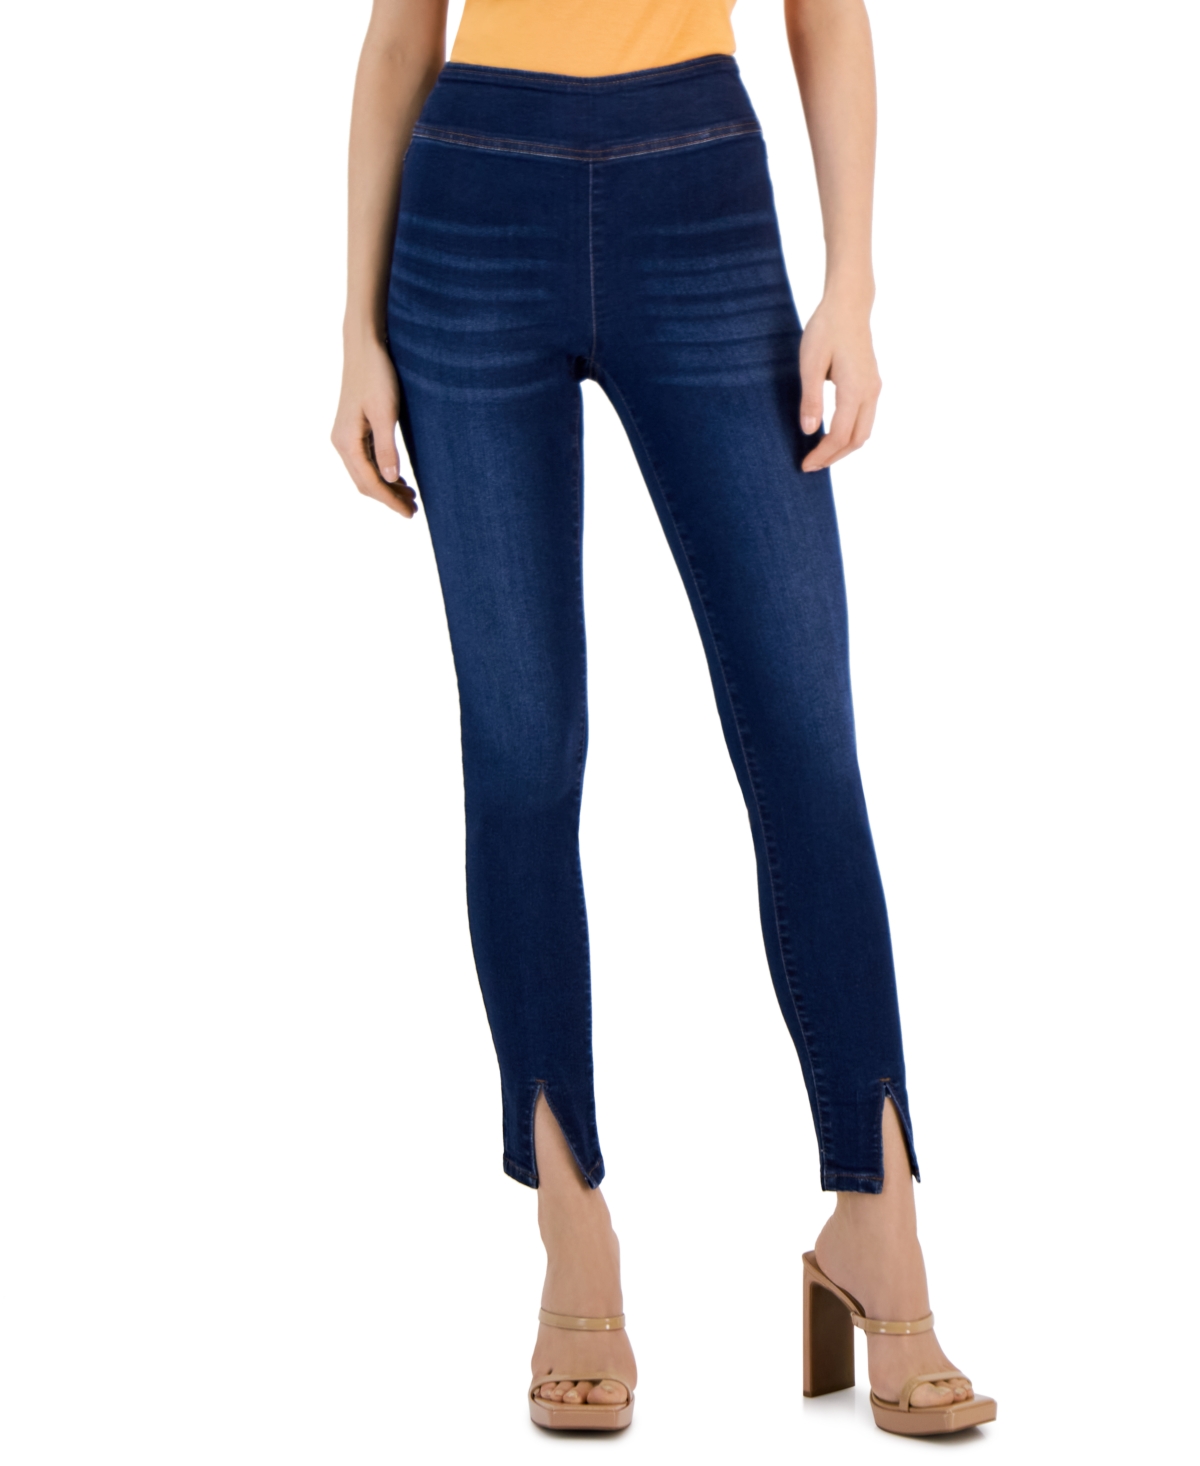  Inc International Concepts Women's Pull-On Skinny Ankle Jeans, Created for Macy's